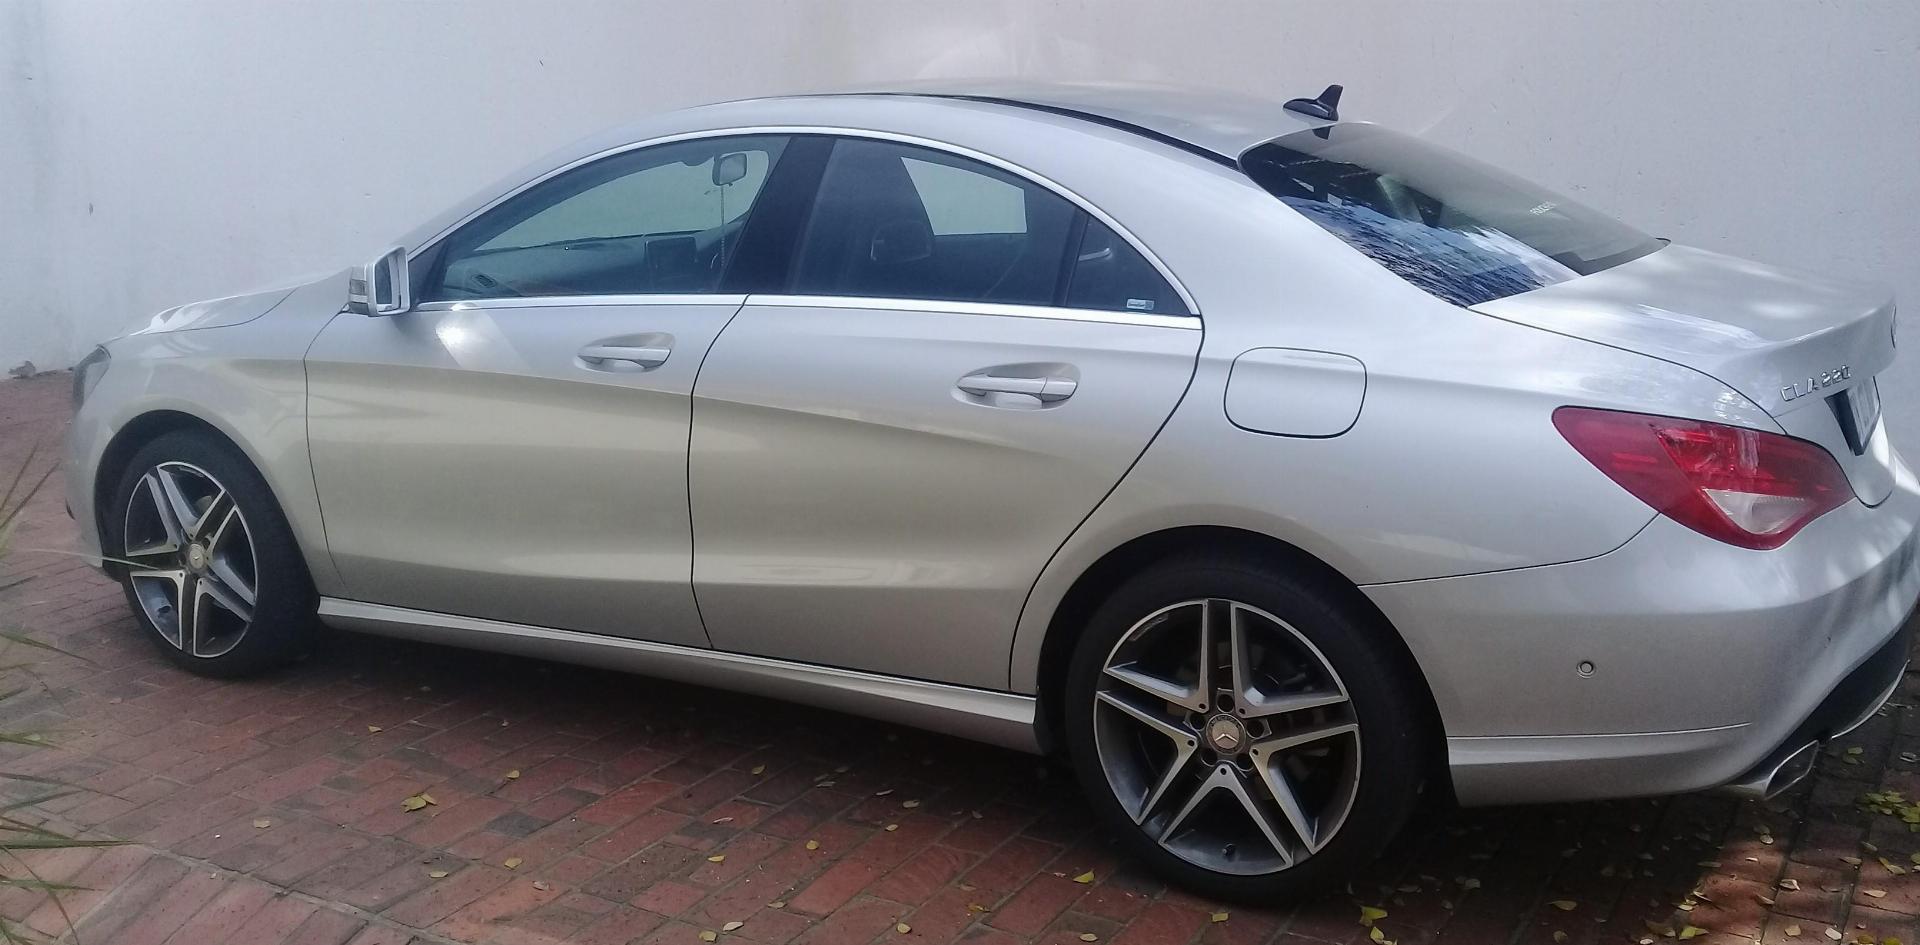 Used Mercedes Benz MERCEDES-BENZ Cla 220 Cdi AM - Coupe 2015 on auction - PV1025997